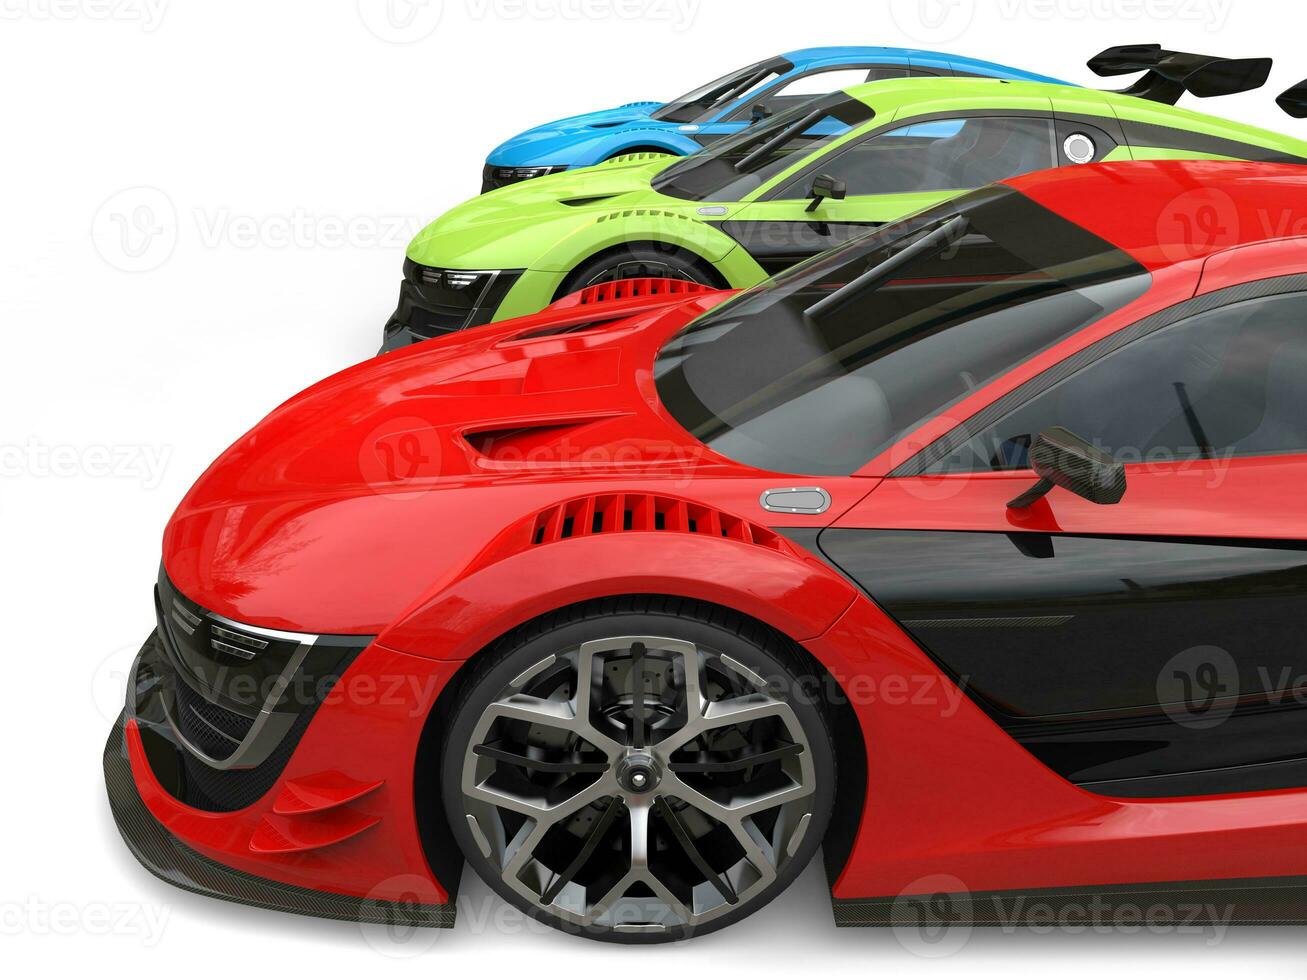 Red, green and blue super cars - side view cut shot photo